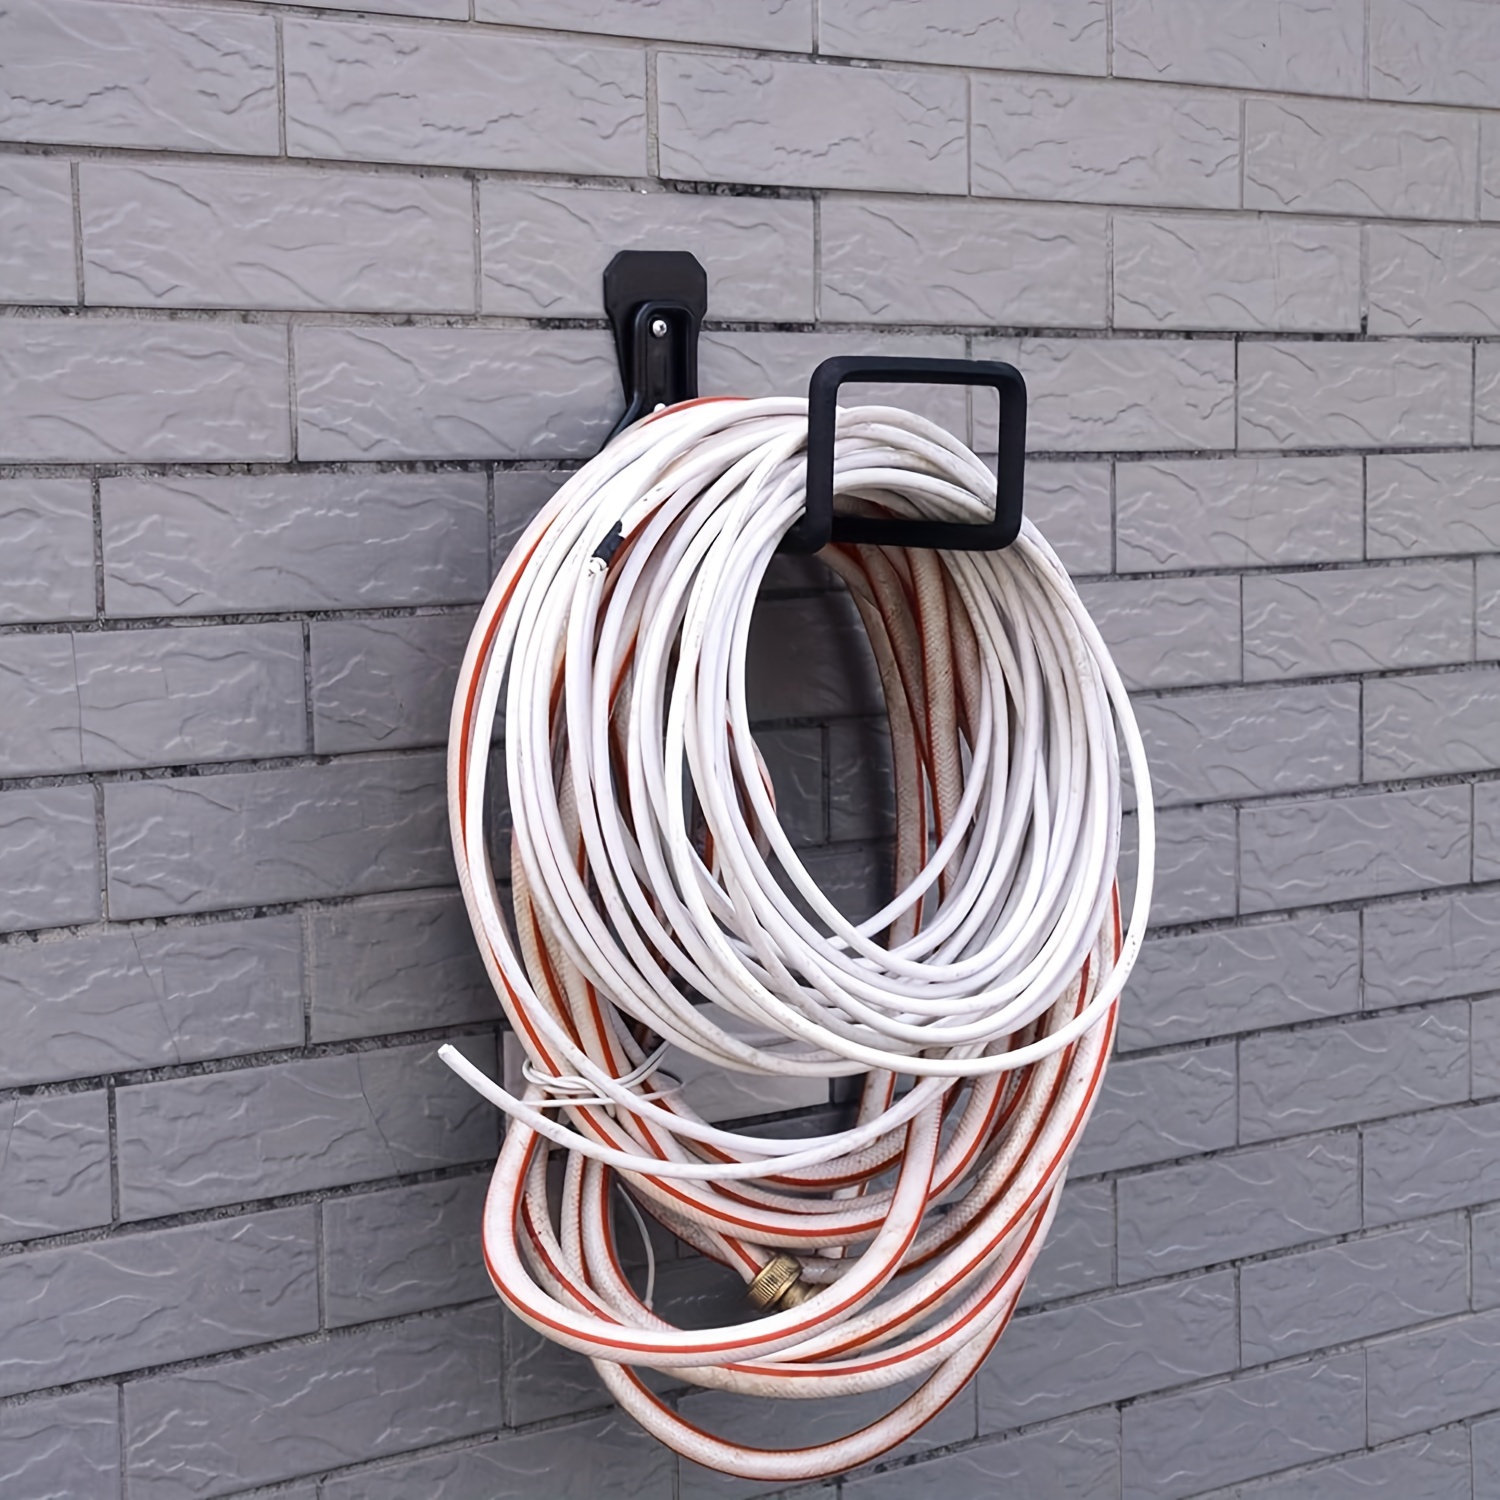  Wall Mounted Garden Hose Holder,Wall Mount Heavy Duty Hose  Holder, Pipe Reel Hanger Holder Cable Storage Bracket Ideal for Water, Air,  Hydraulic Hose, Ropes, Extension Cords, Wall Mount Heavy Du 